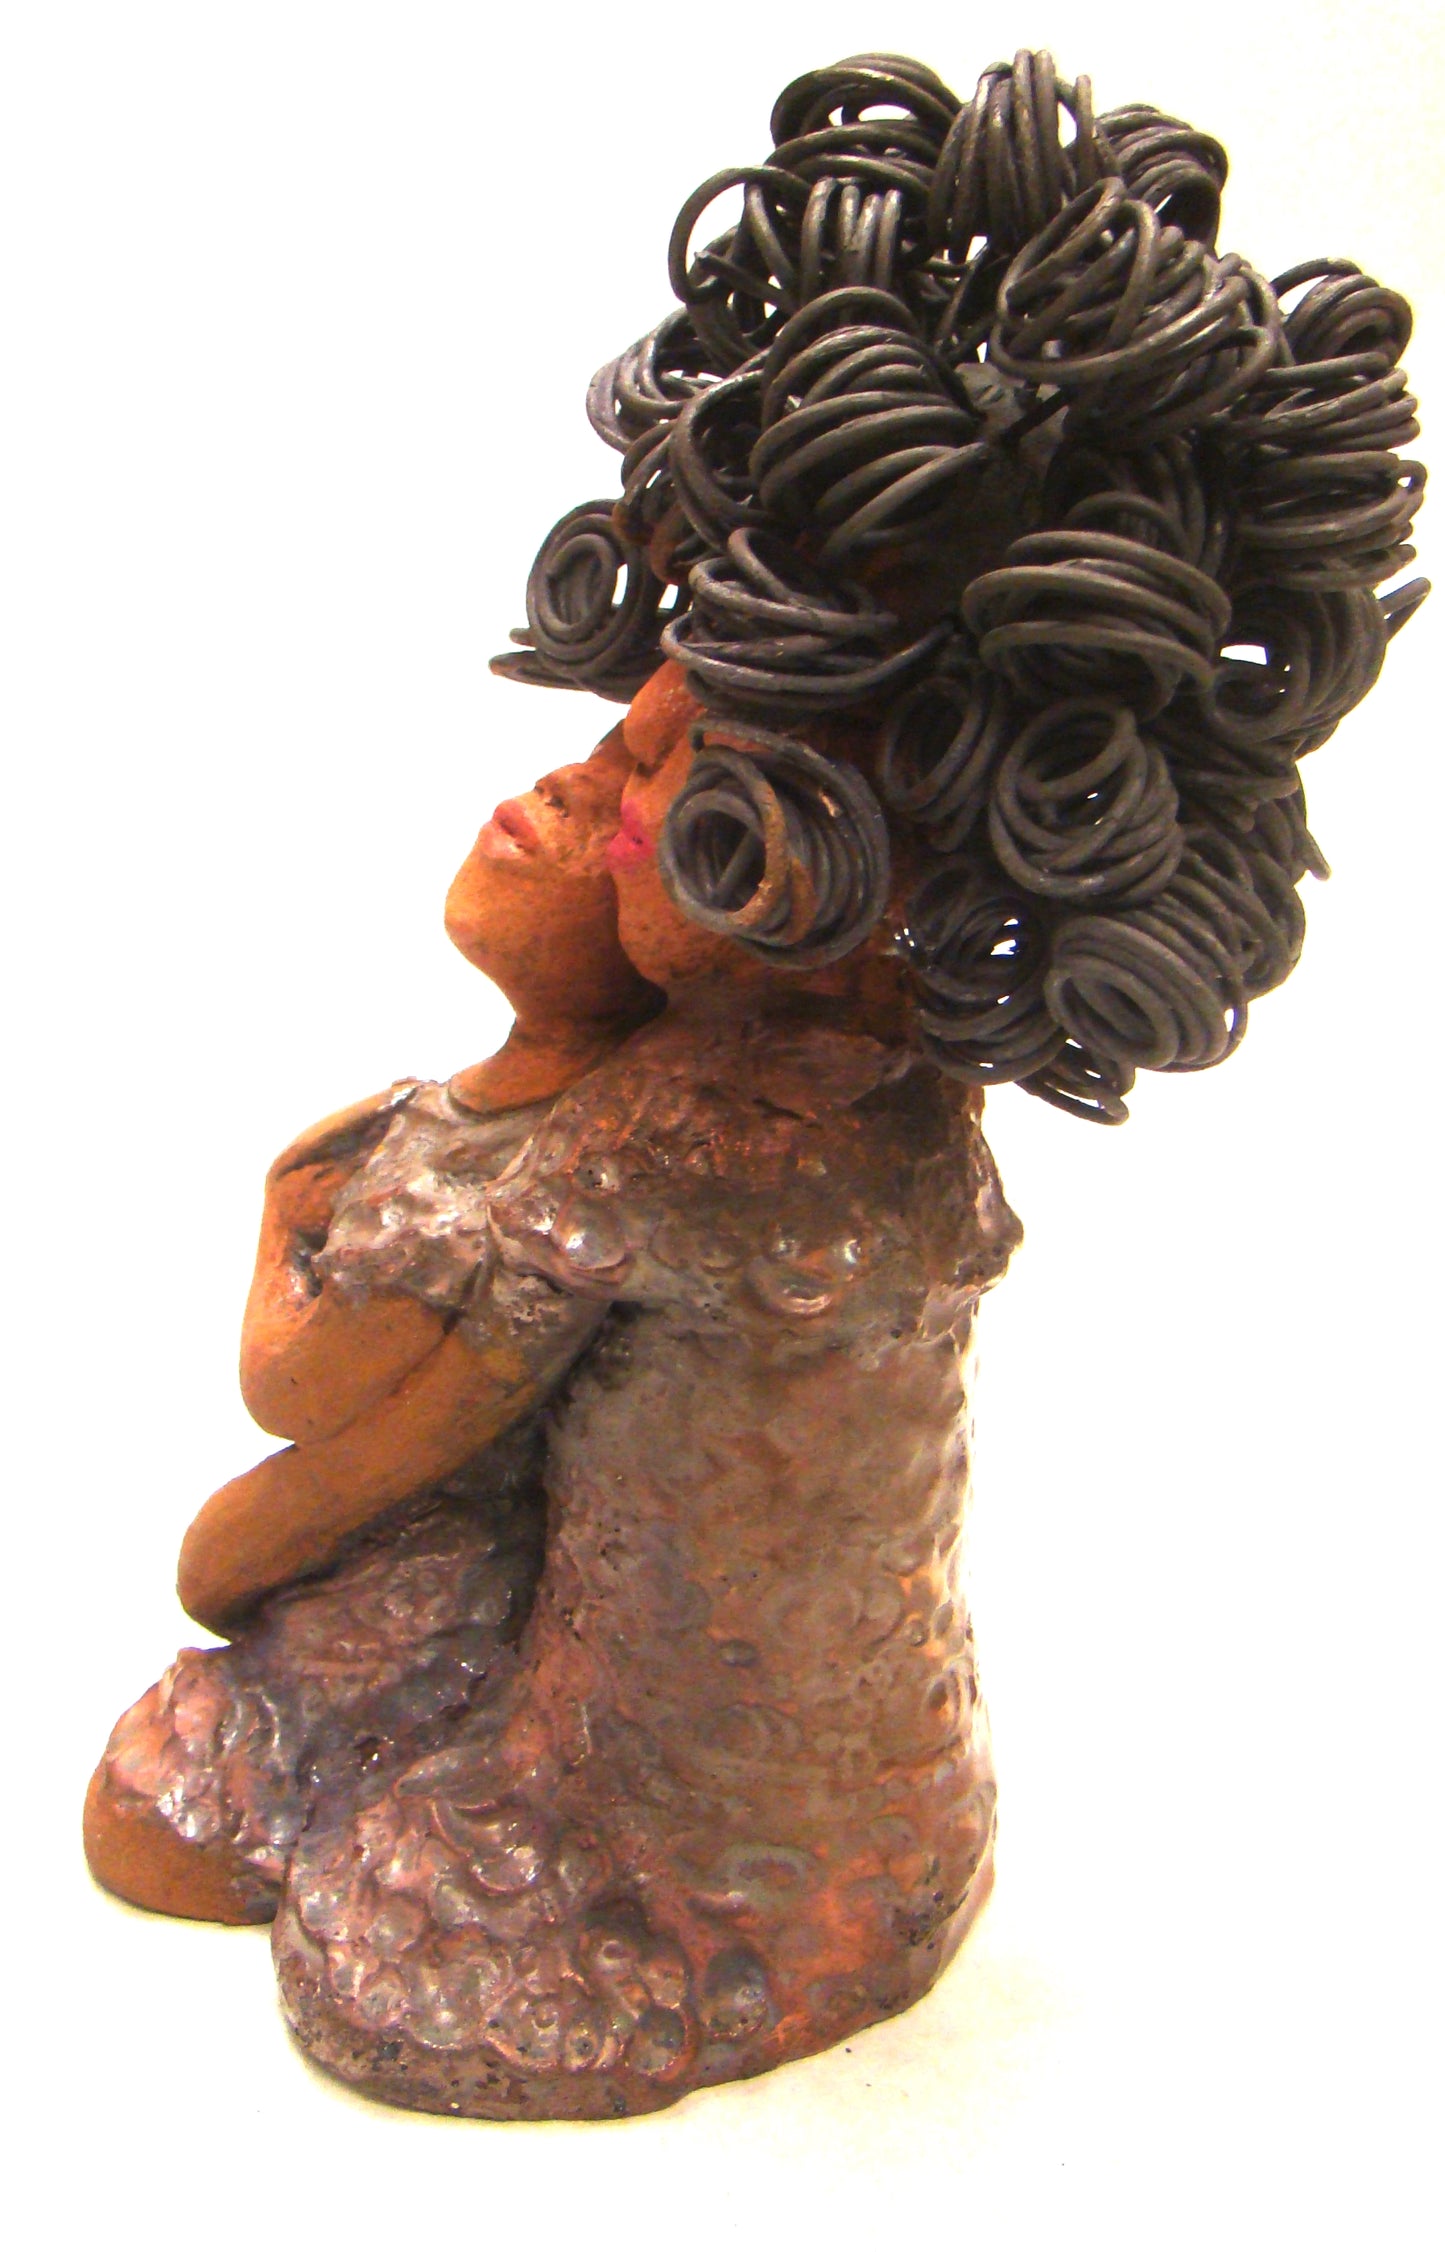 I Love You More stands 8.5 " x 4.5" x 4".5" and weighs 2.10 lbs. They have lovely honey brown complexions. Combined, I Love You More has over 25 feet of curly wire hair. They have glossy metallic copper dresses. They have long loving arms. One  is embracing the other. I Love You More! will  help illustrate the love that is in your home! Free Shipping!